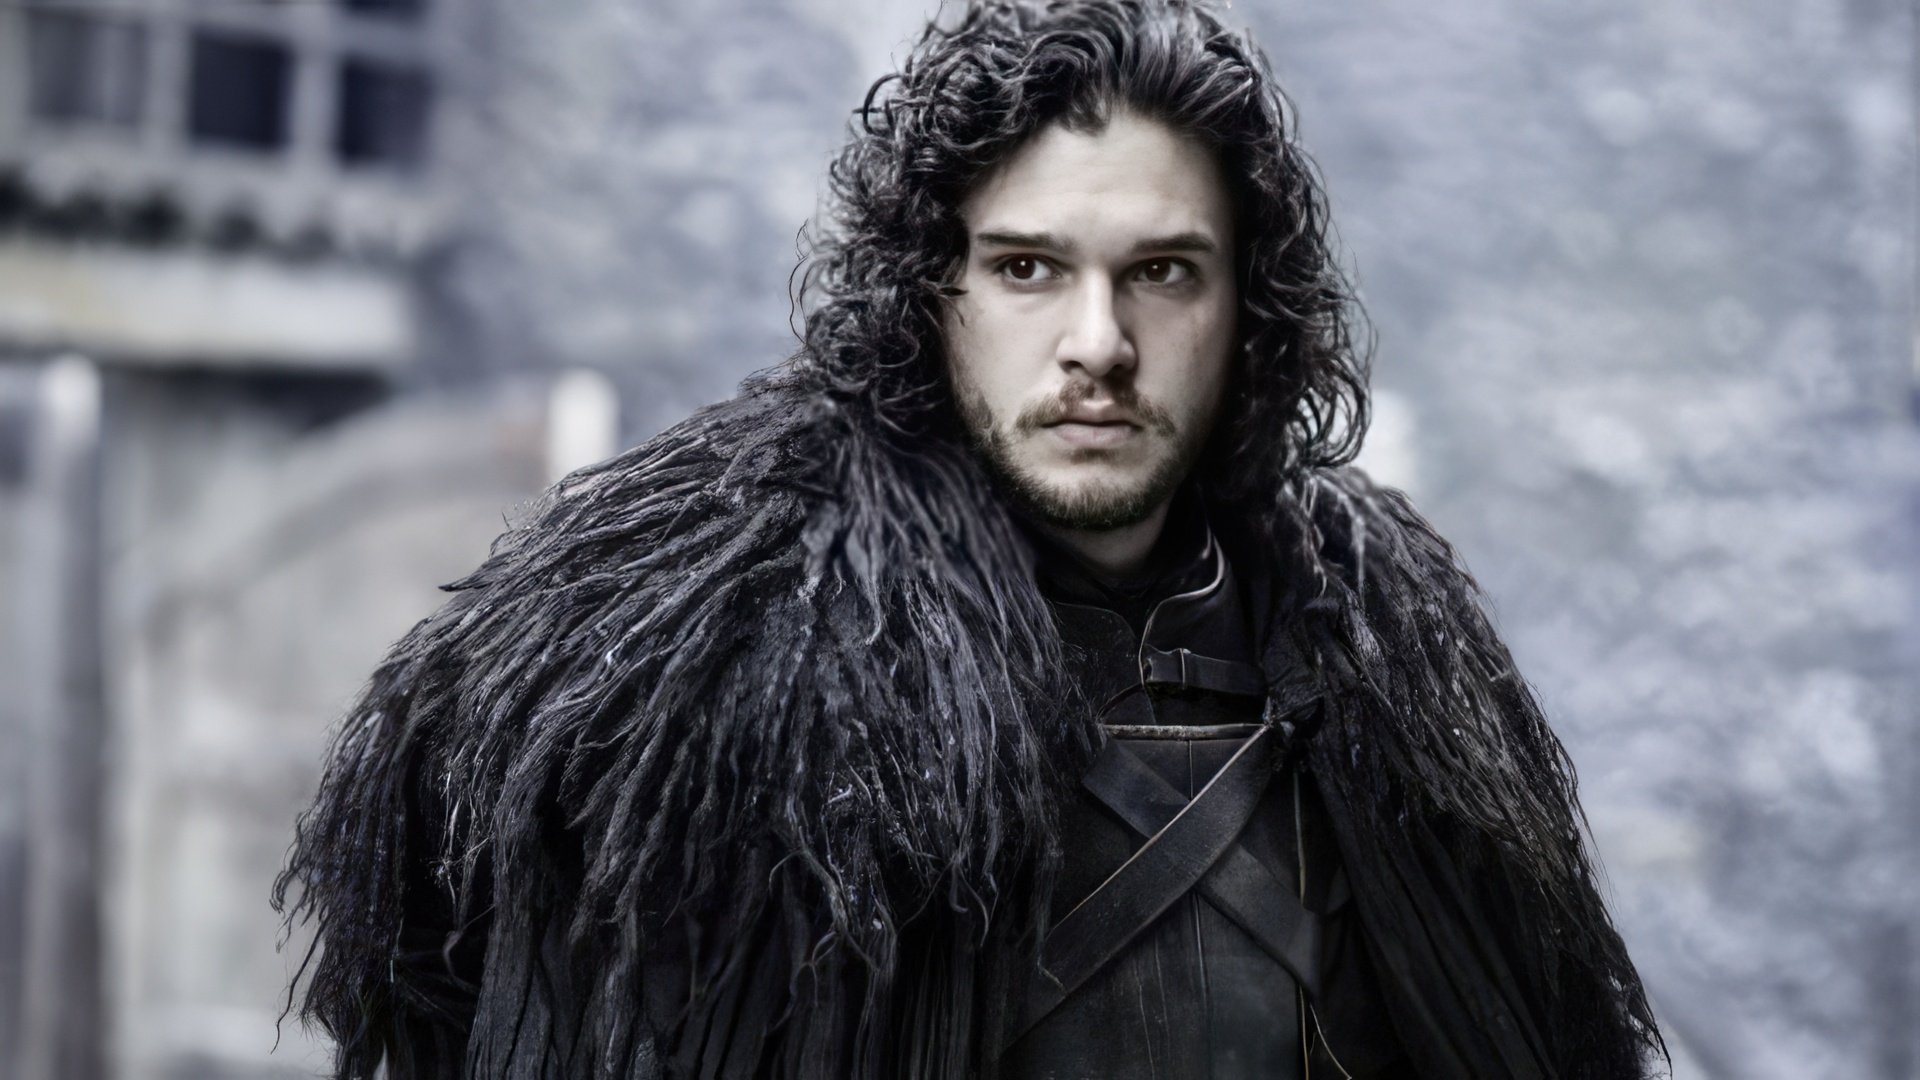 The role of Jon Snow brought fame to Kit Harington